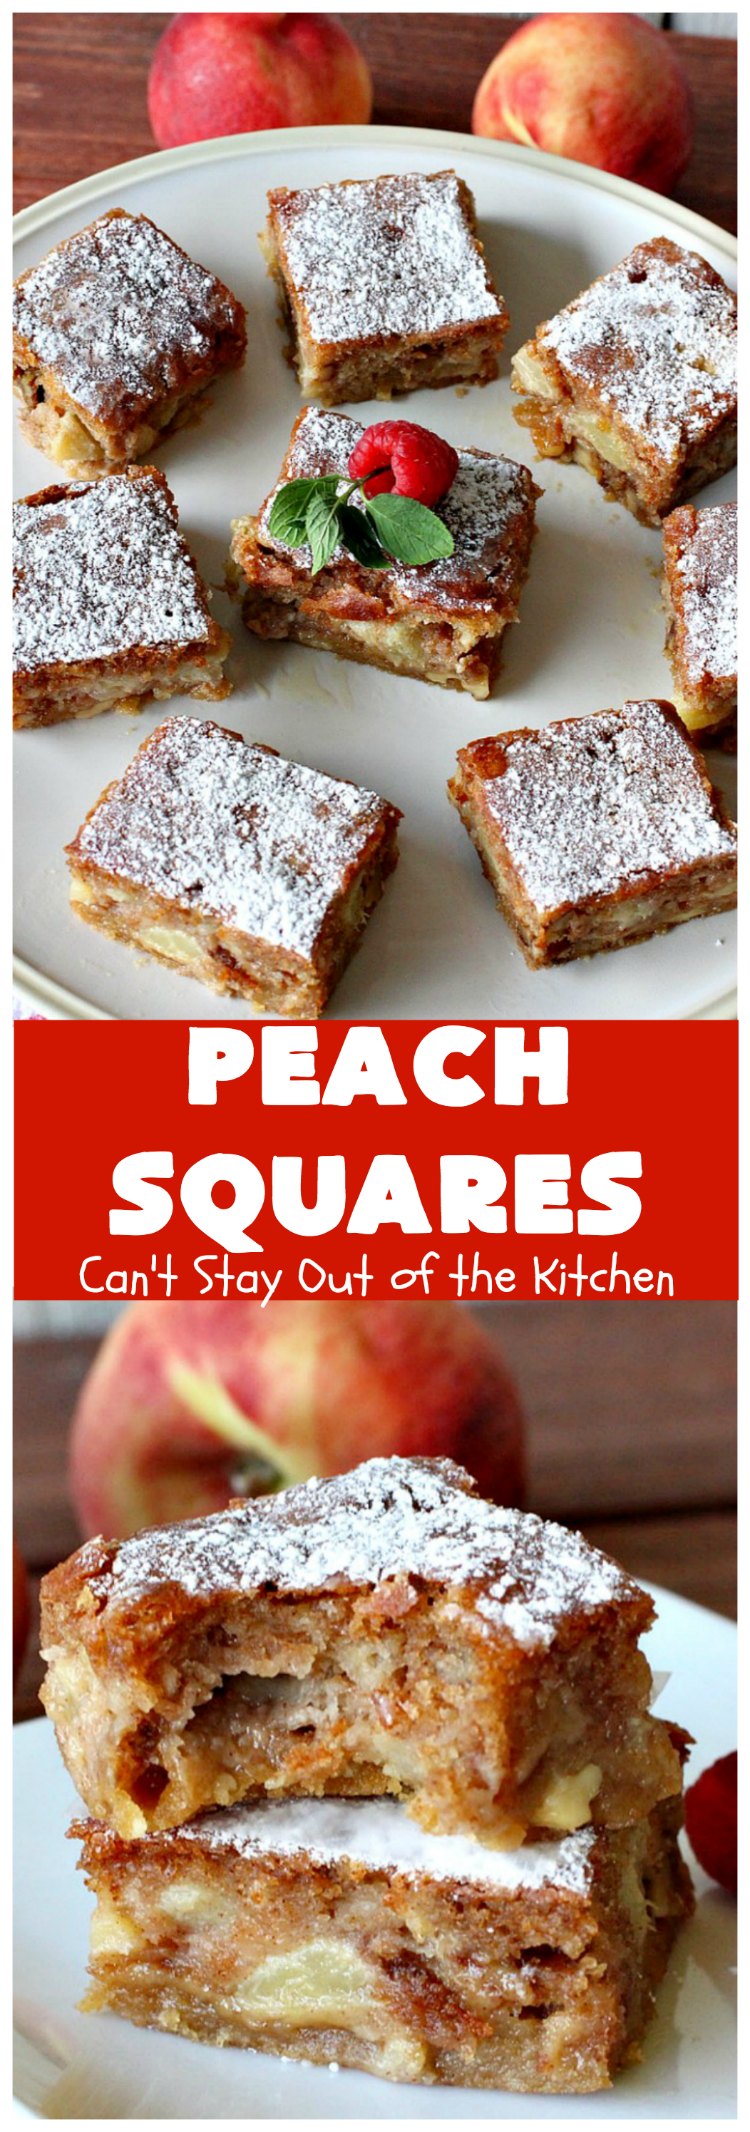 Peach Squares | Can't Stay Out of the Kitchen | this awesome #recipe can't be beat! If you enjoy #peaches, you'll love them in this amazing #dessert. #cookies #PeachDessert #PeachSquares #walnuts